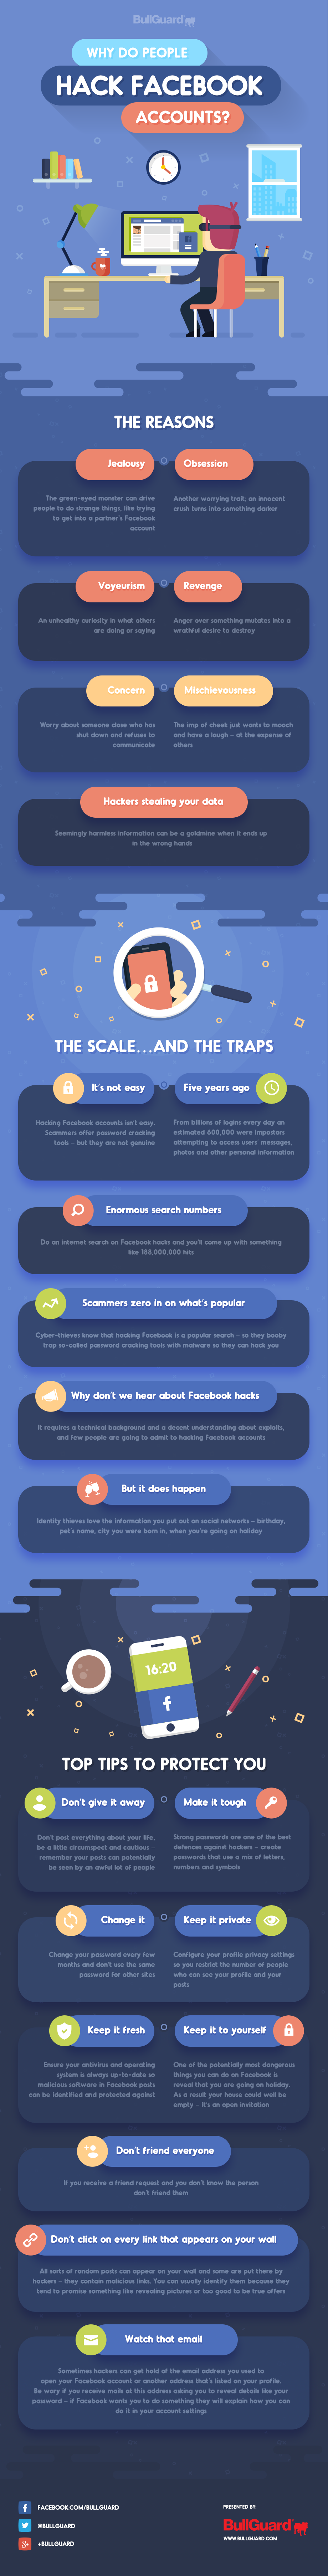 Why Do People Hack Facebook Accounts? #infographic